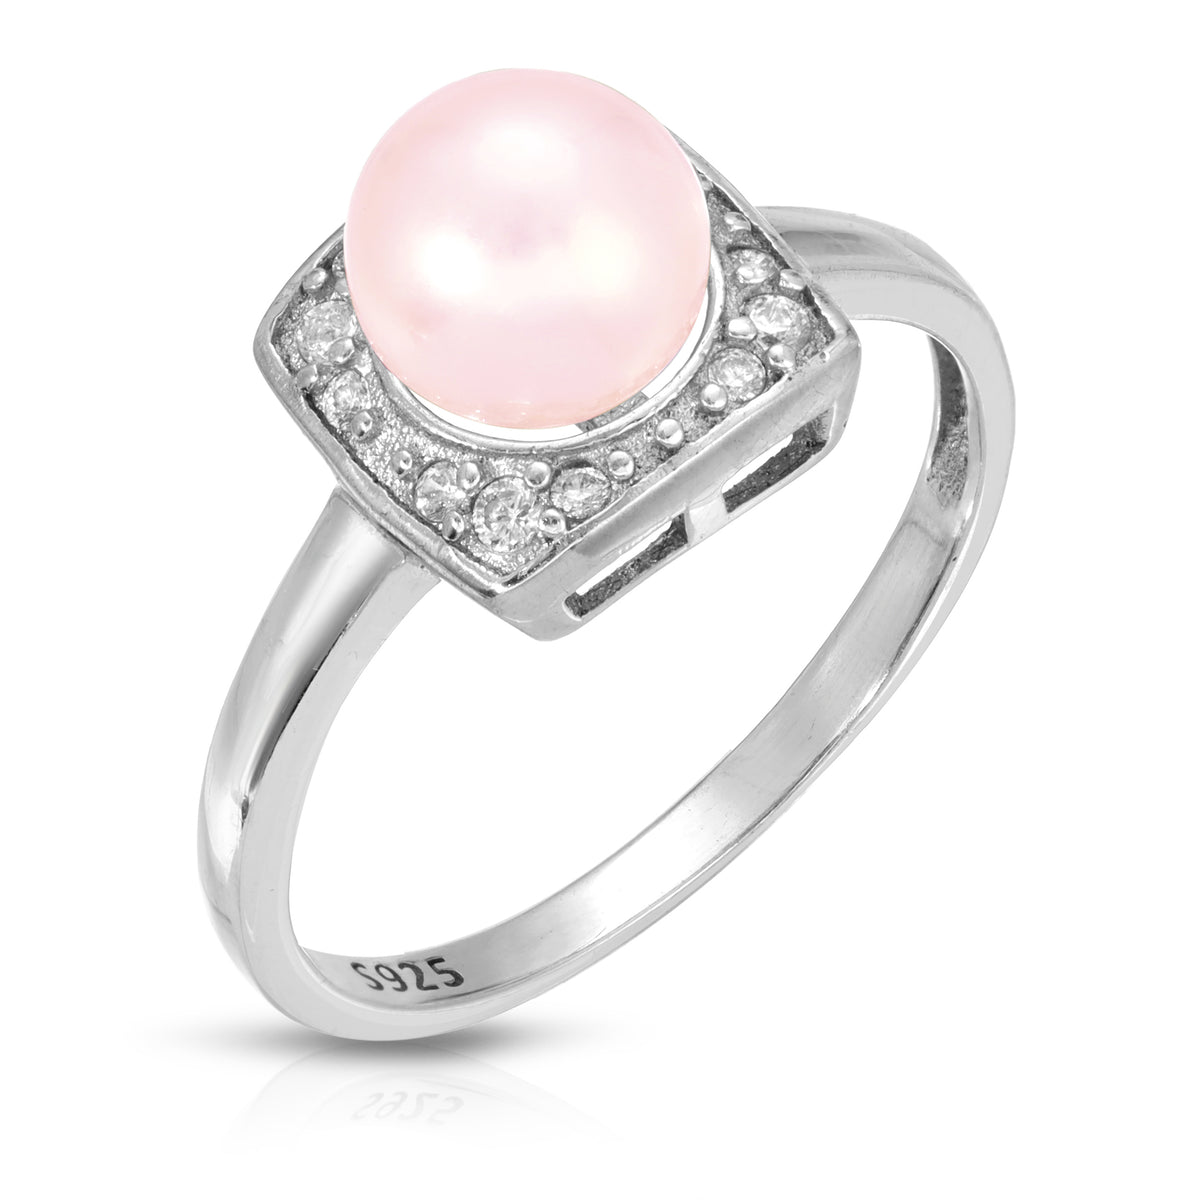 Sterling Silver Timeless Design Pearl Ring